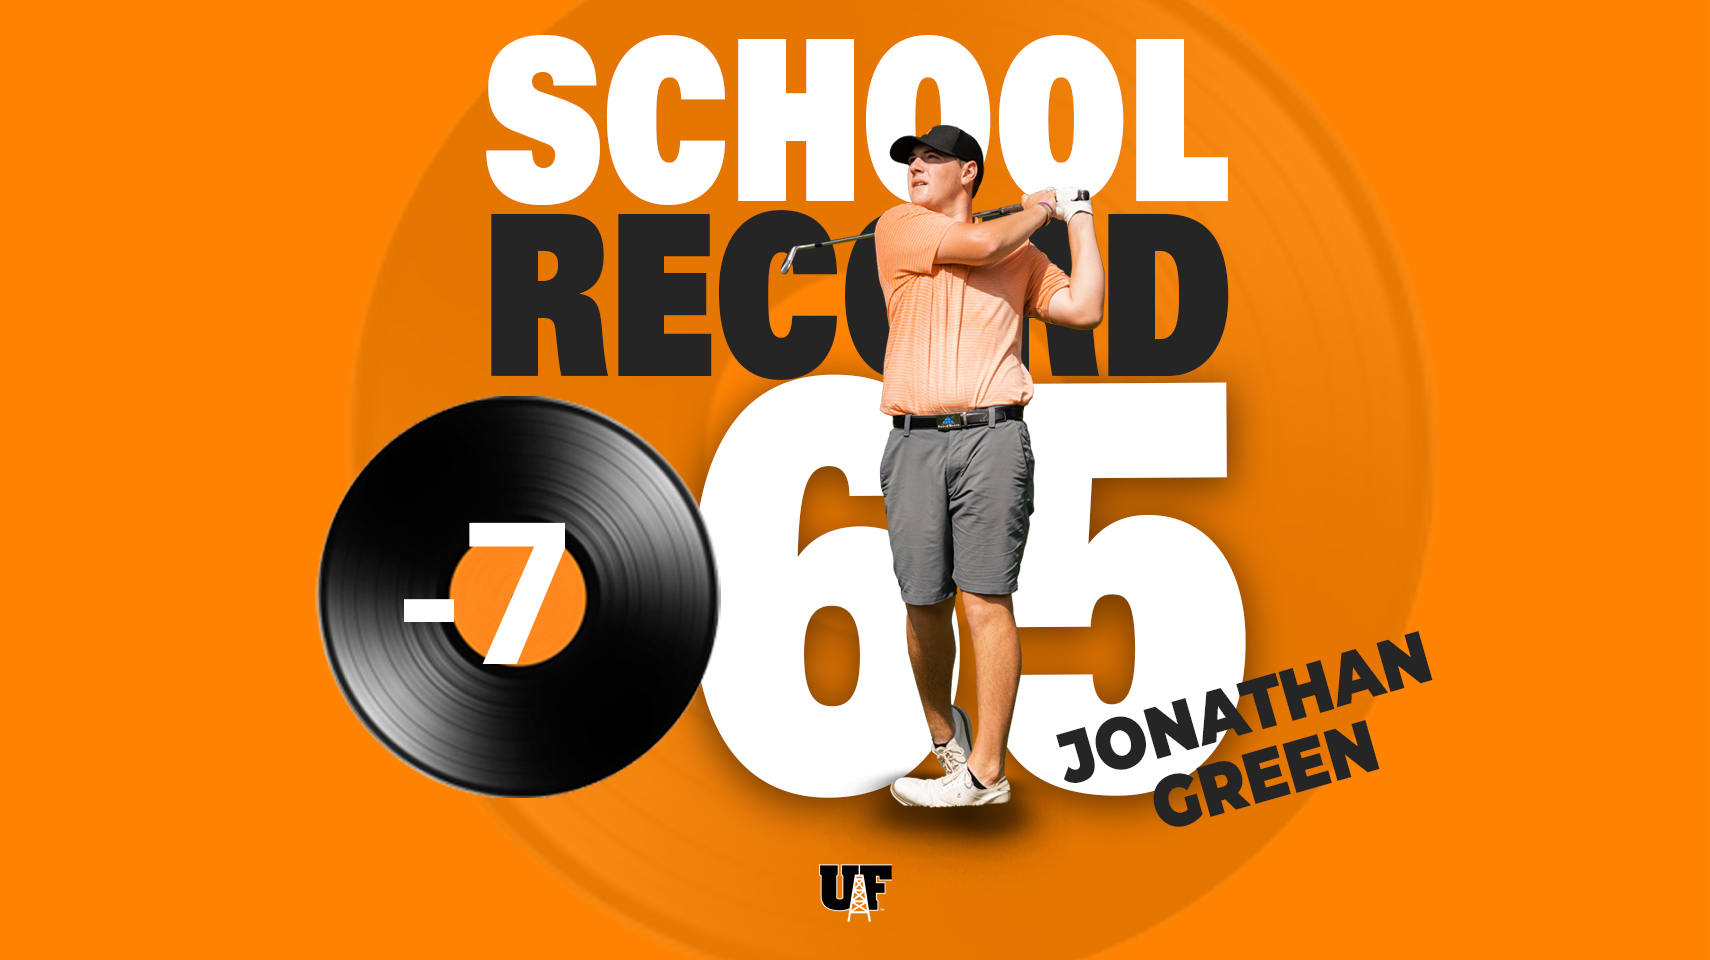 Men's golfer on orange background with school record 65 on the graphic